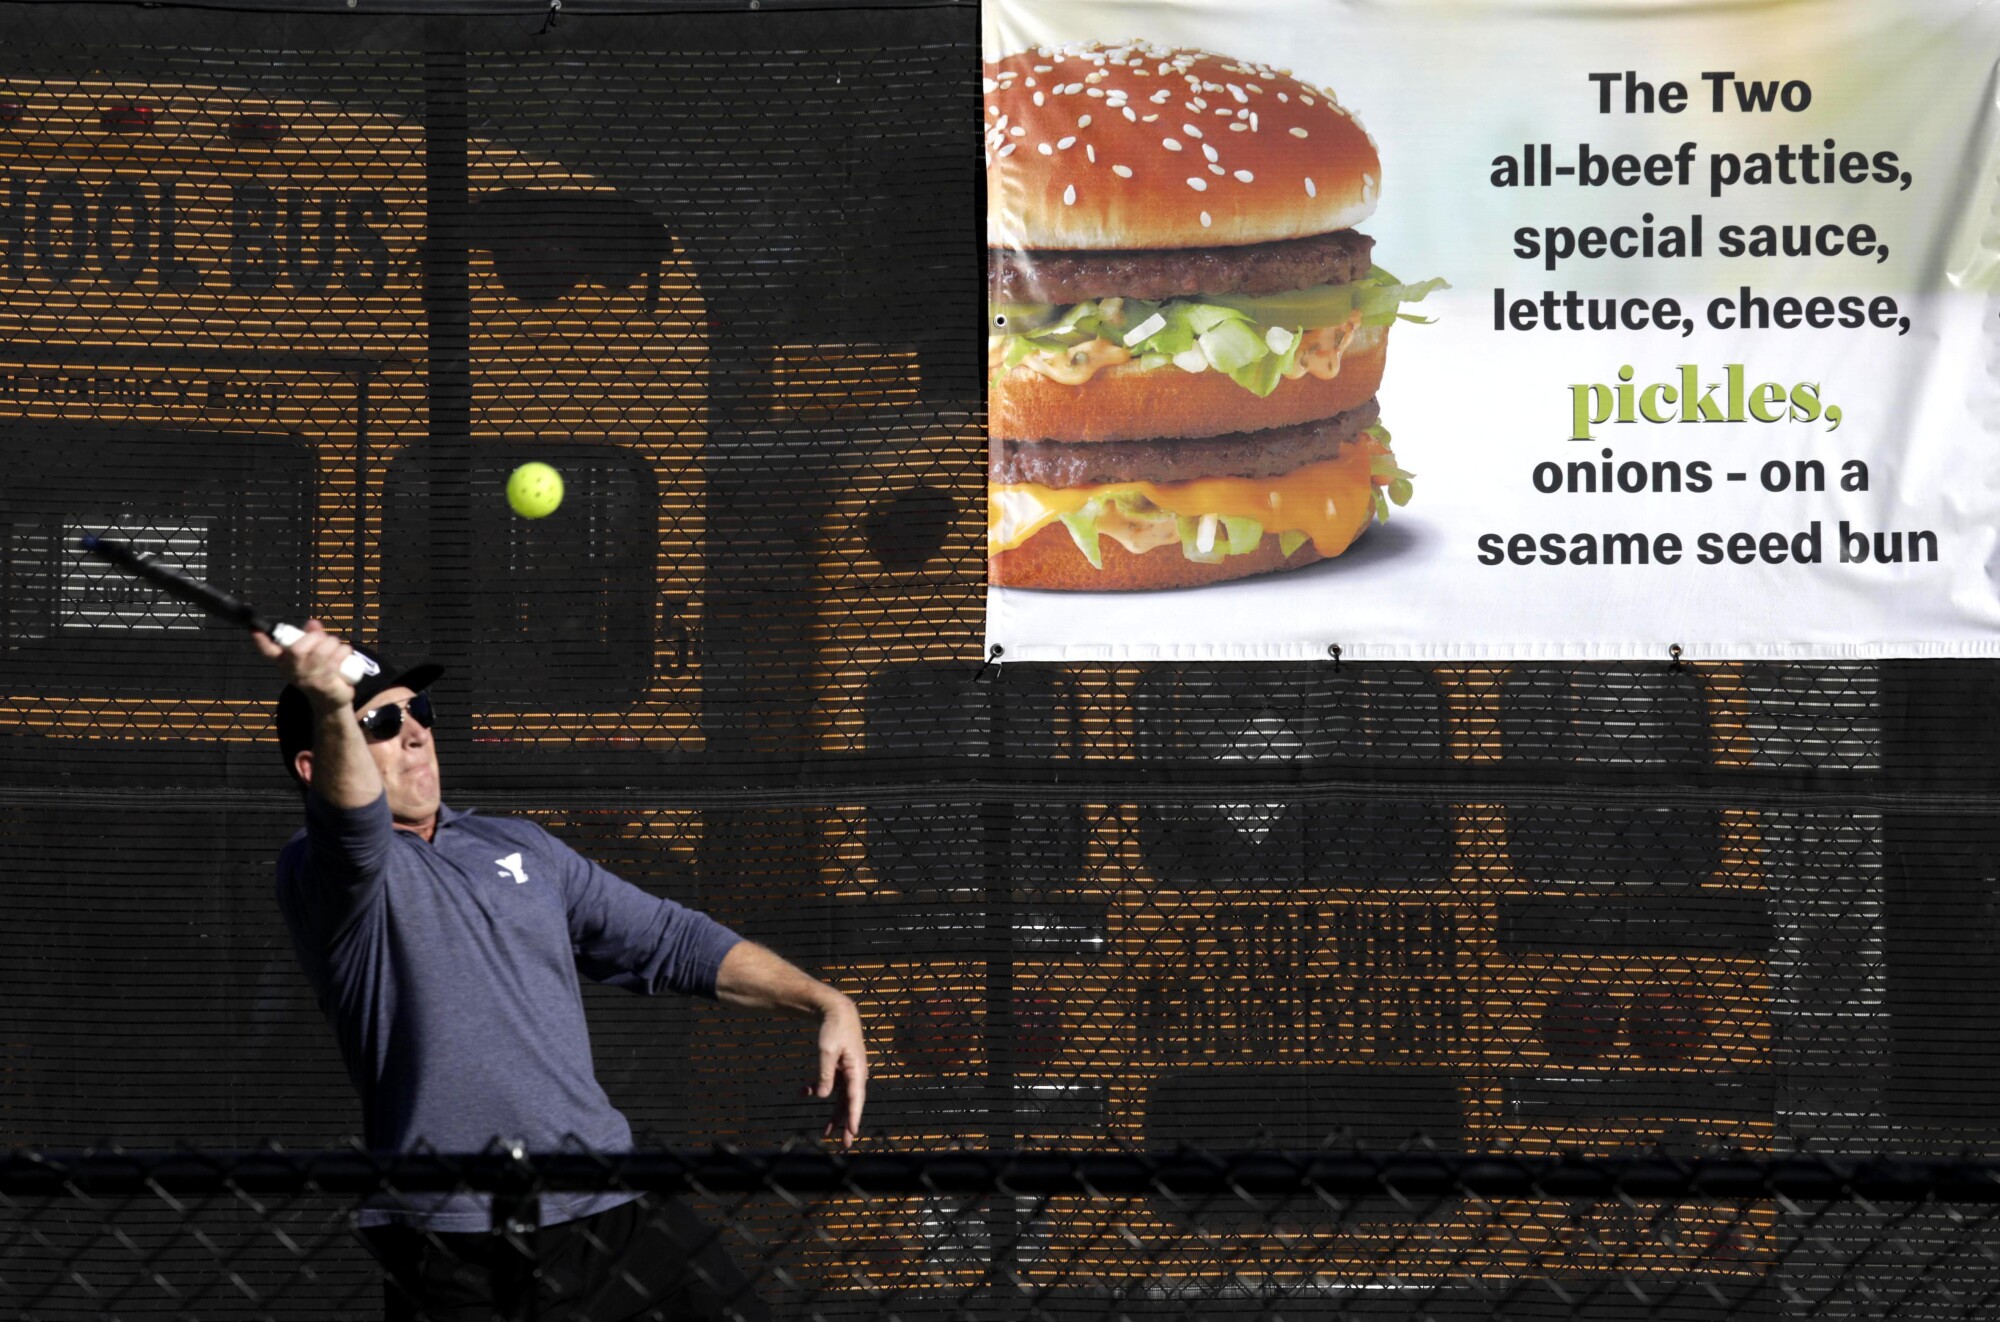 A pickleball player hits the ball in front of a sign showing a Big Mac